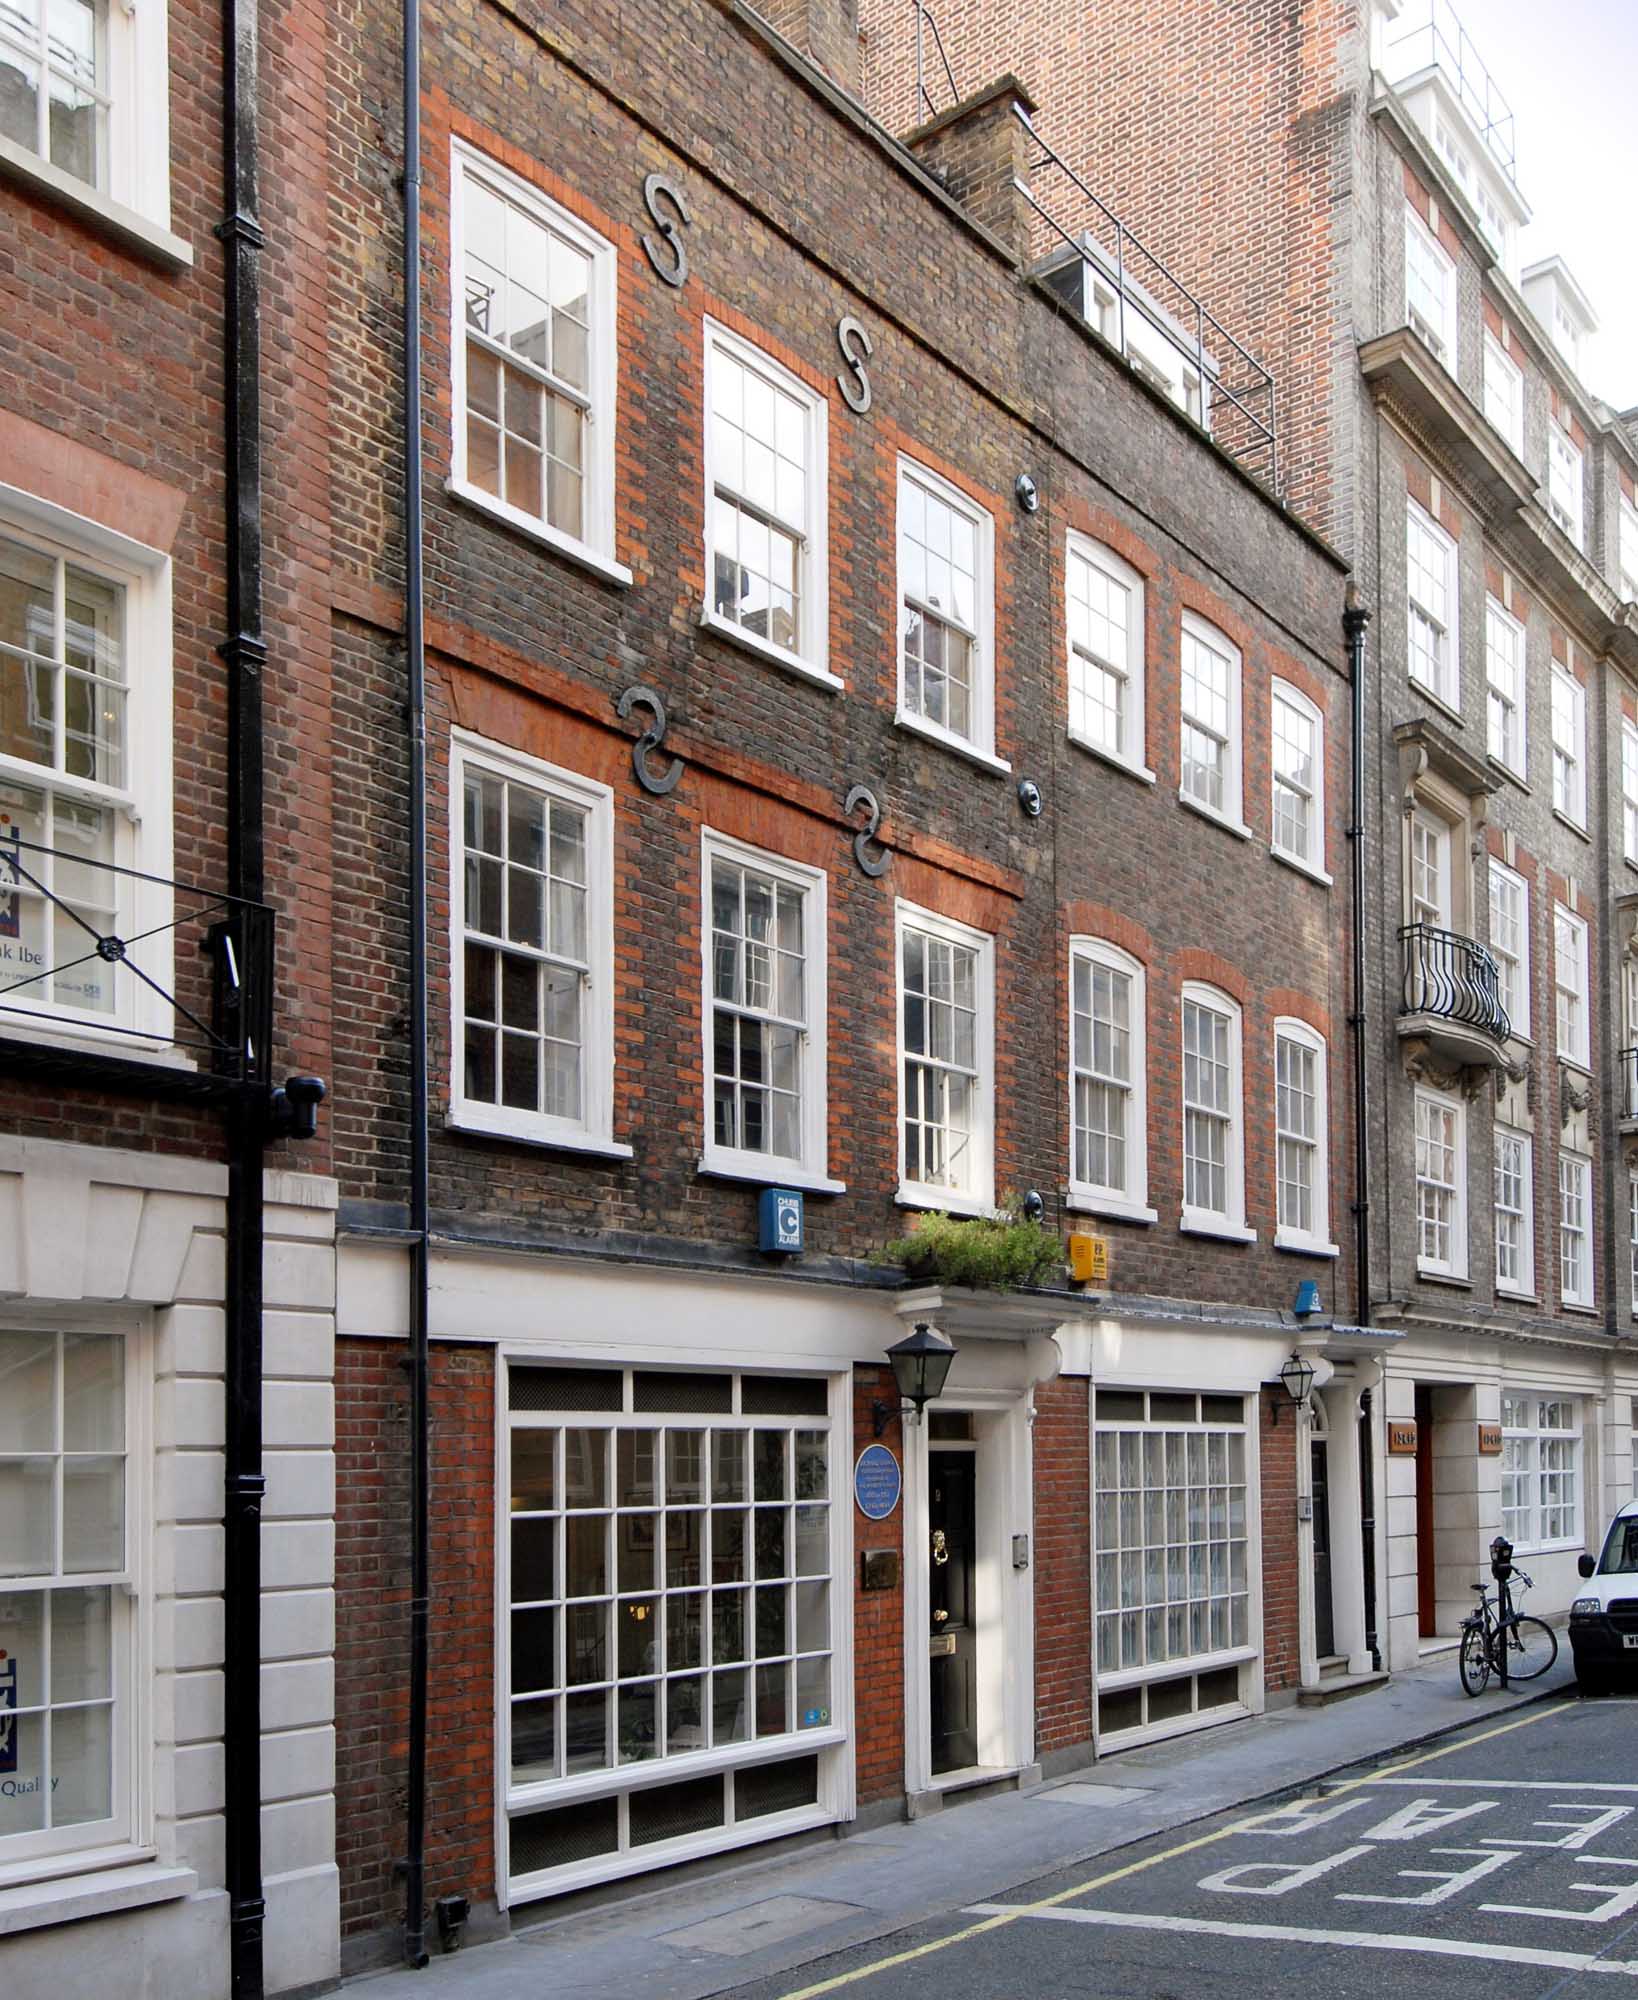 One of the oldest homes in Westminster is for sale